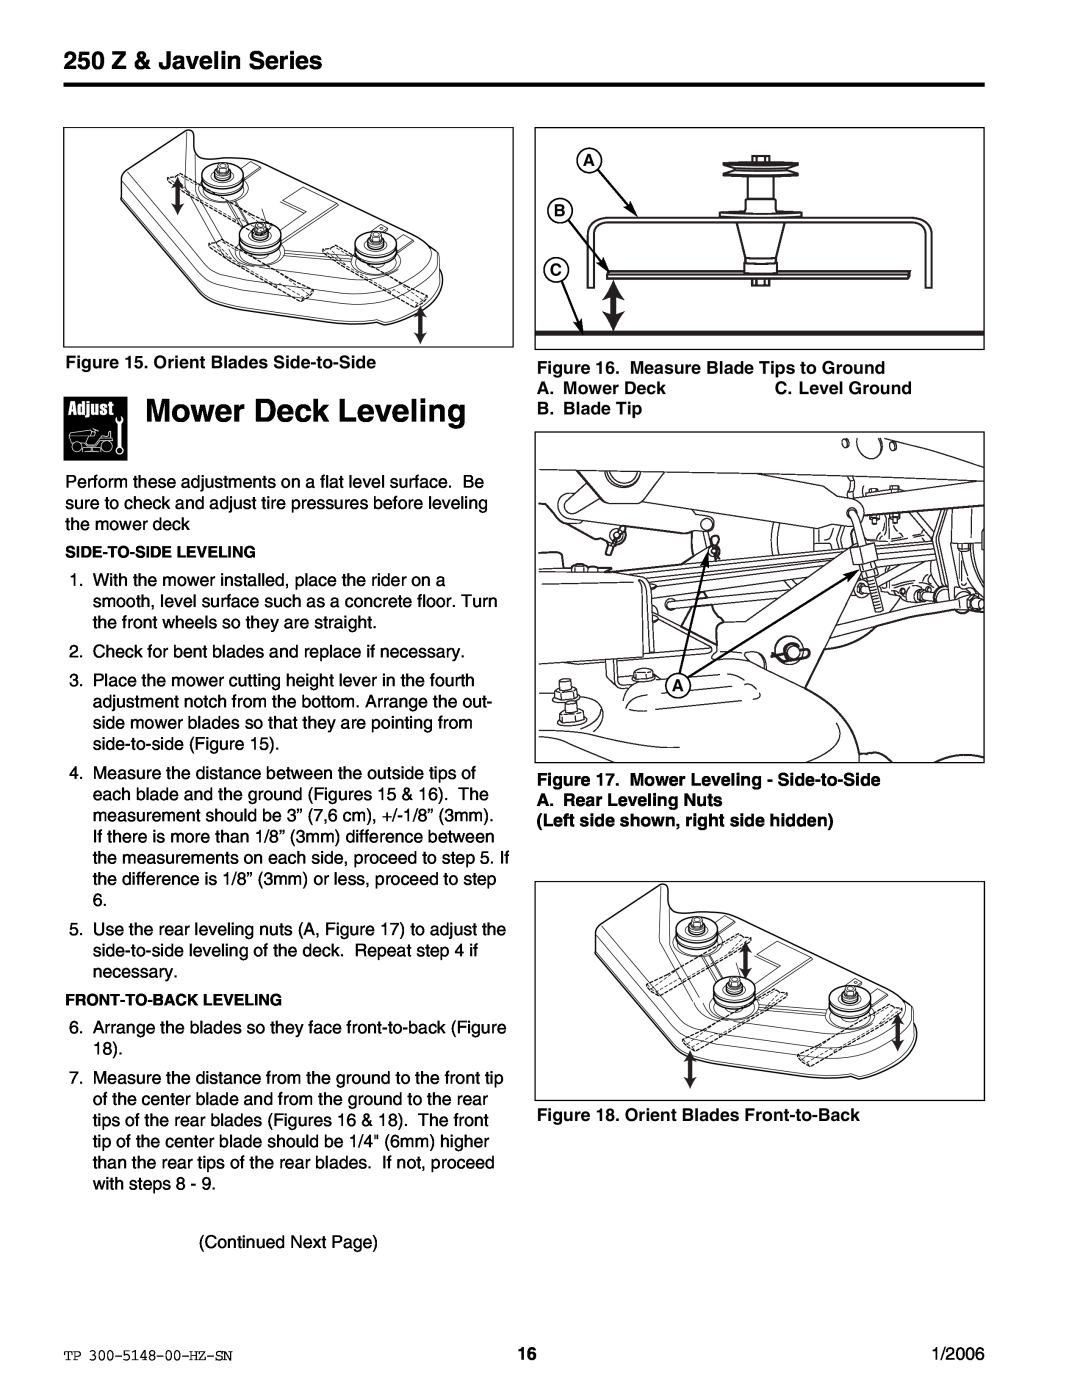 Snapper ERZT185440BVE manual Mower Deck Leveling, 250 Z & Javelin Series, Side-To-Side Leveling, Front-To-Back Leveling 